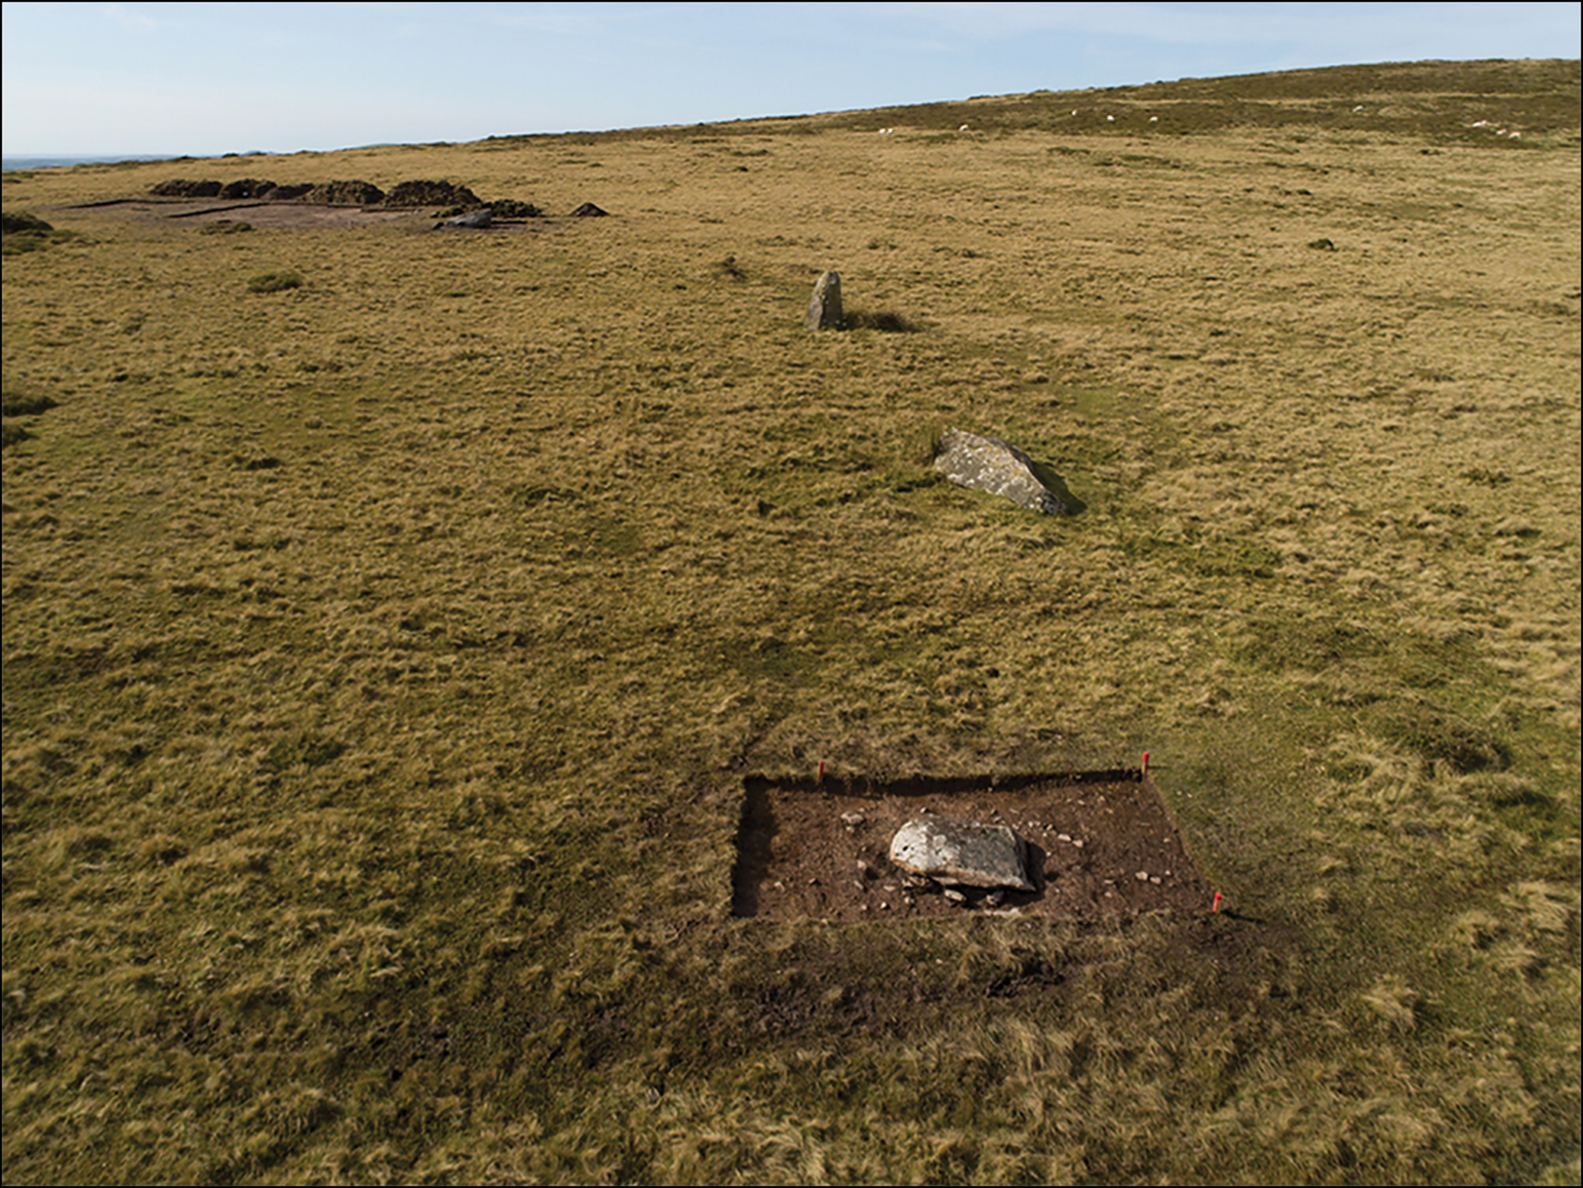 PICTURED: The arc of the former standing stones at Waun Mawn, Wales during trial excavations in 2017. Photo credit: A. Stanford.